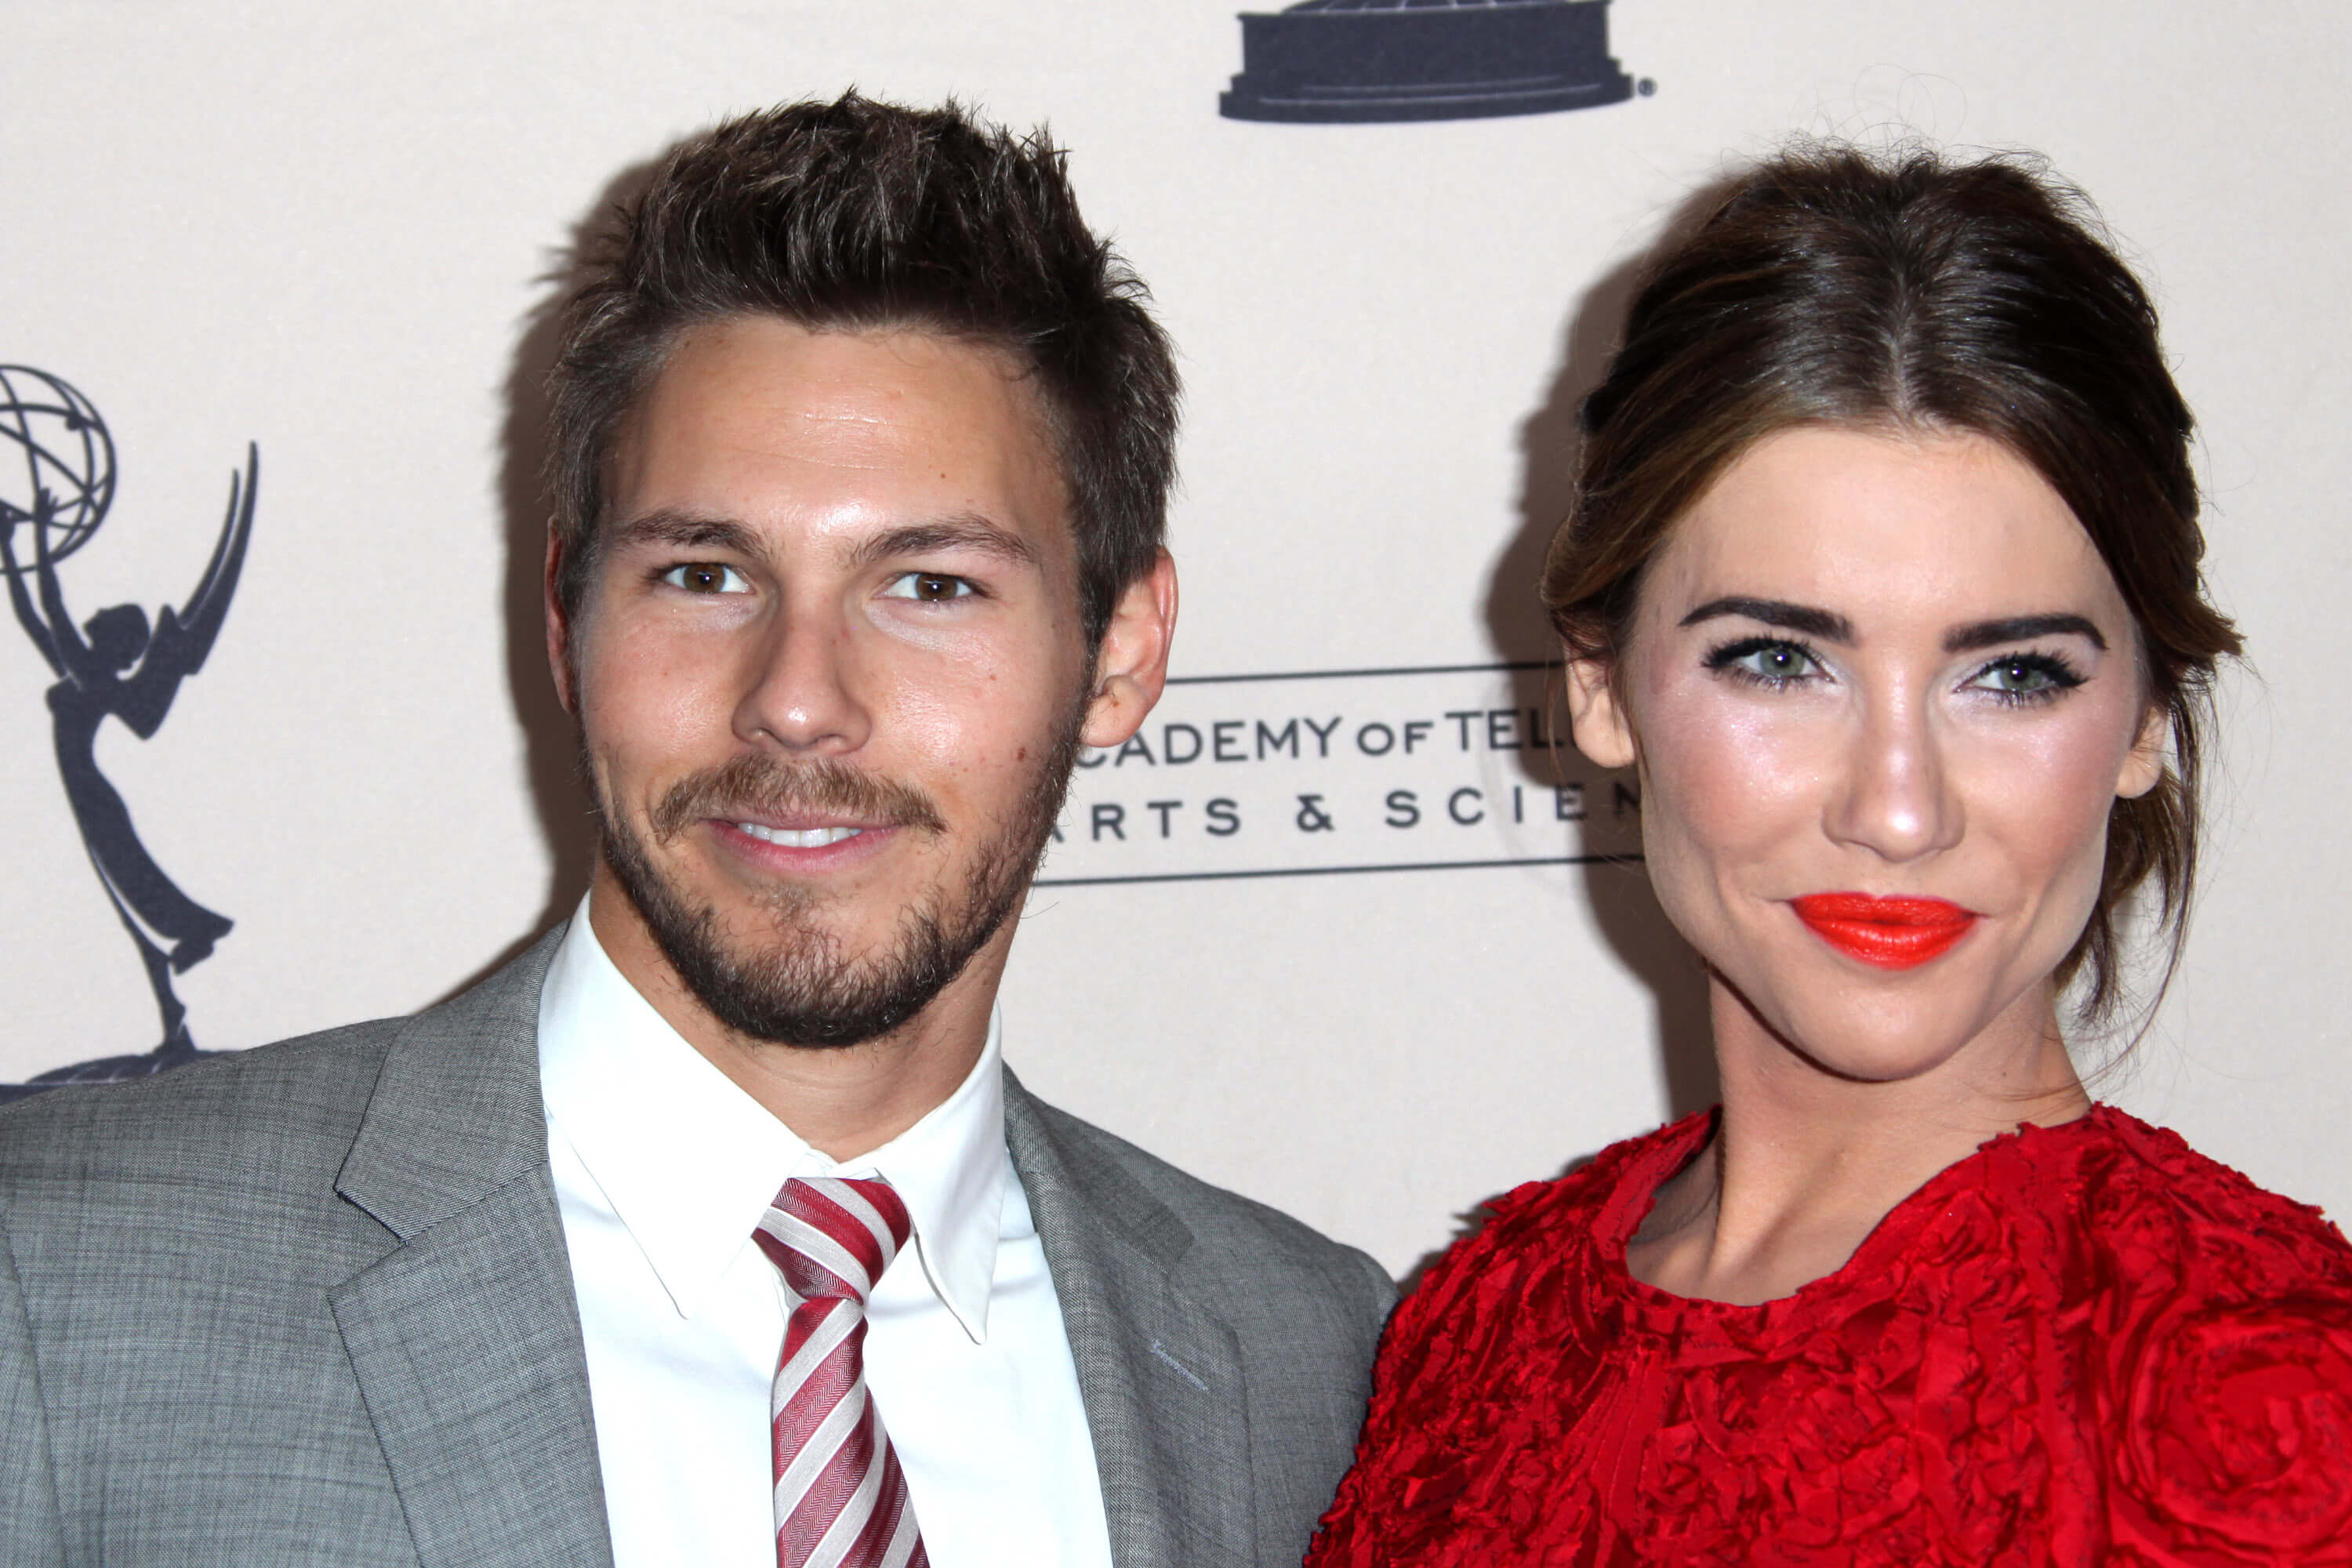 'The Bold and the Beautiful' star Scott Clifton in a grey suit and Jacqueline MacInnes Wood in a red dress; posing together on the red carpet.